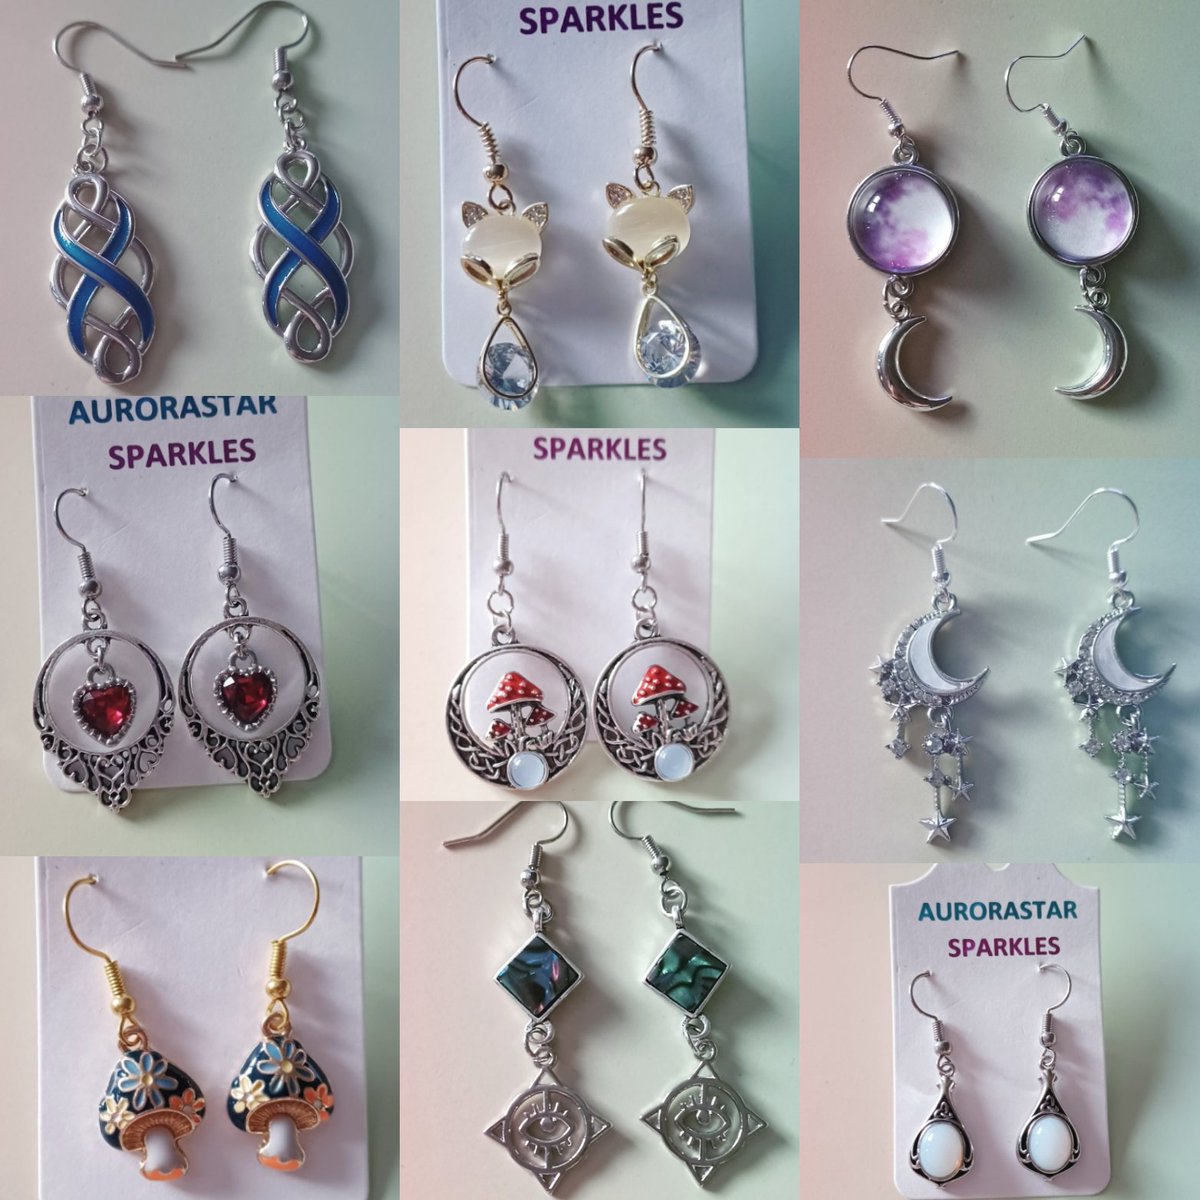 Looking for some pretty earrings for someone special this #Christmas Take a look at these new ones Facebook.com/Aurorastar1007 #shopindie #giftideas #planahead #UKGiftHour #SaturdayMorning #supportsmallbusiness